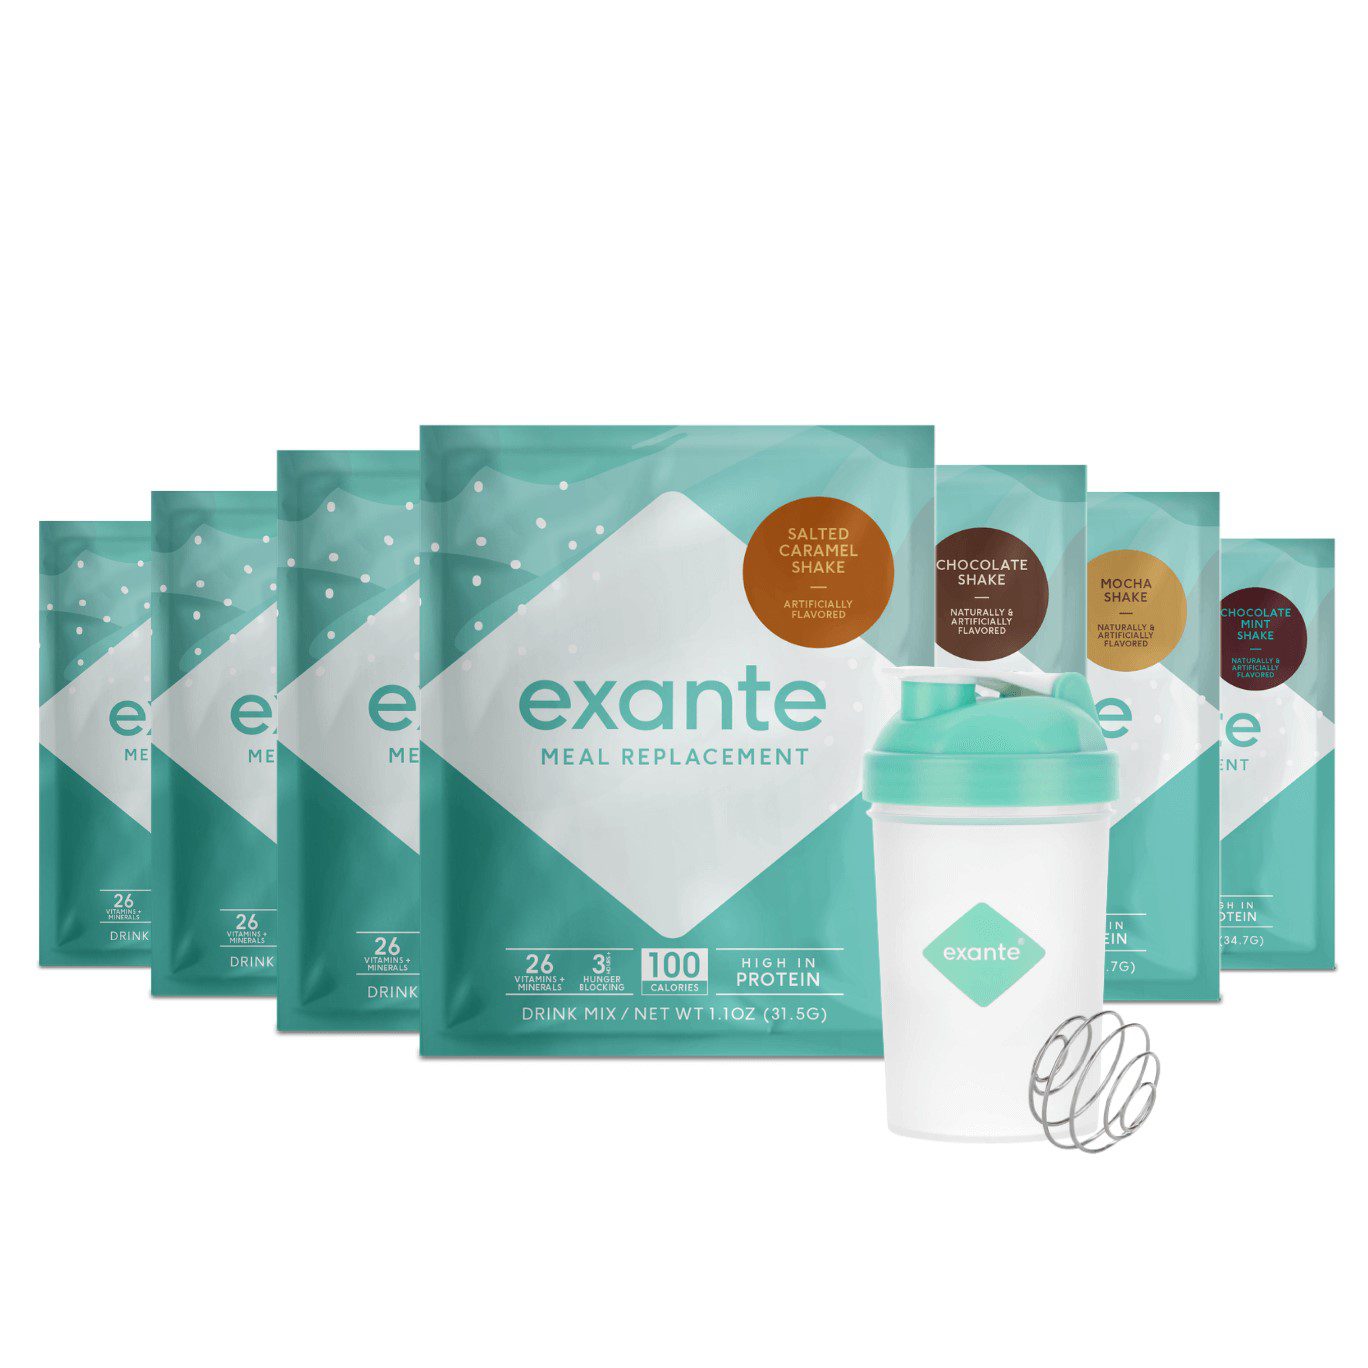 Exante Review Meal replacements